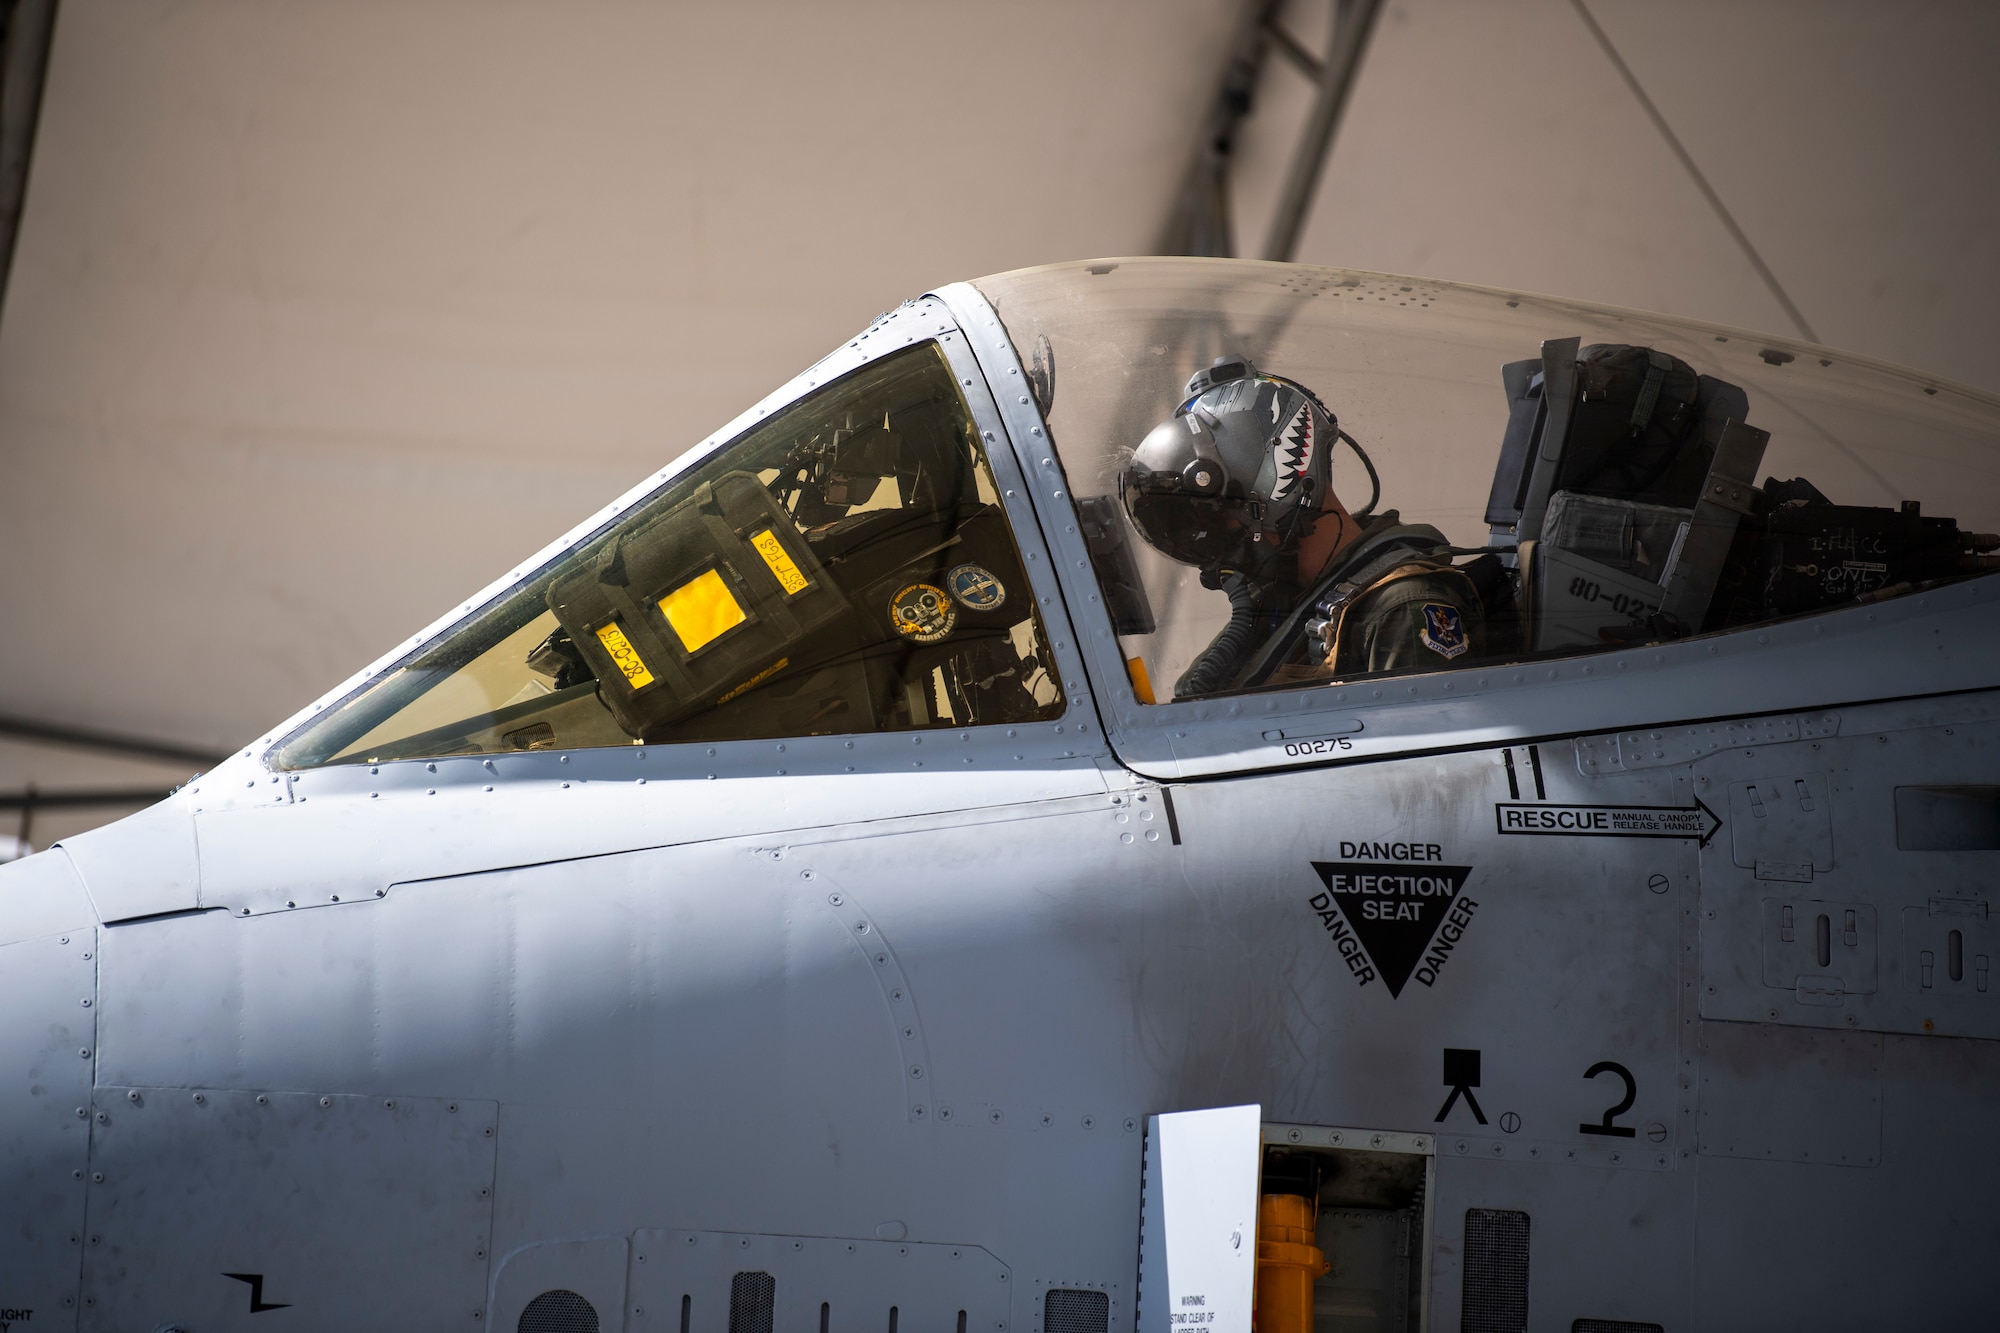 A U.S. Air Force A-10C Thunderbolt II pilot assigned to the 23rd Fighter Group prepares for take-off during Exercise Ready Tiger 24-1 at Moody Air Force Base, Georgia, April 9, 2024. Both the 75th and 74th Fighter Squadrons are actively participating in RT 24-1 to further their combat readiness for the future fight. Ready Tiger 24-1 is a readiness exercise demonstrating the 23rd Wing’s ability to plan, prepare and execute operations and maintenance to project air power in contested and dispersed locations, defending the United States’ interests and allies. (U.S. Air Force photo by 2nd Lt. Benjamin Williams)